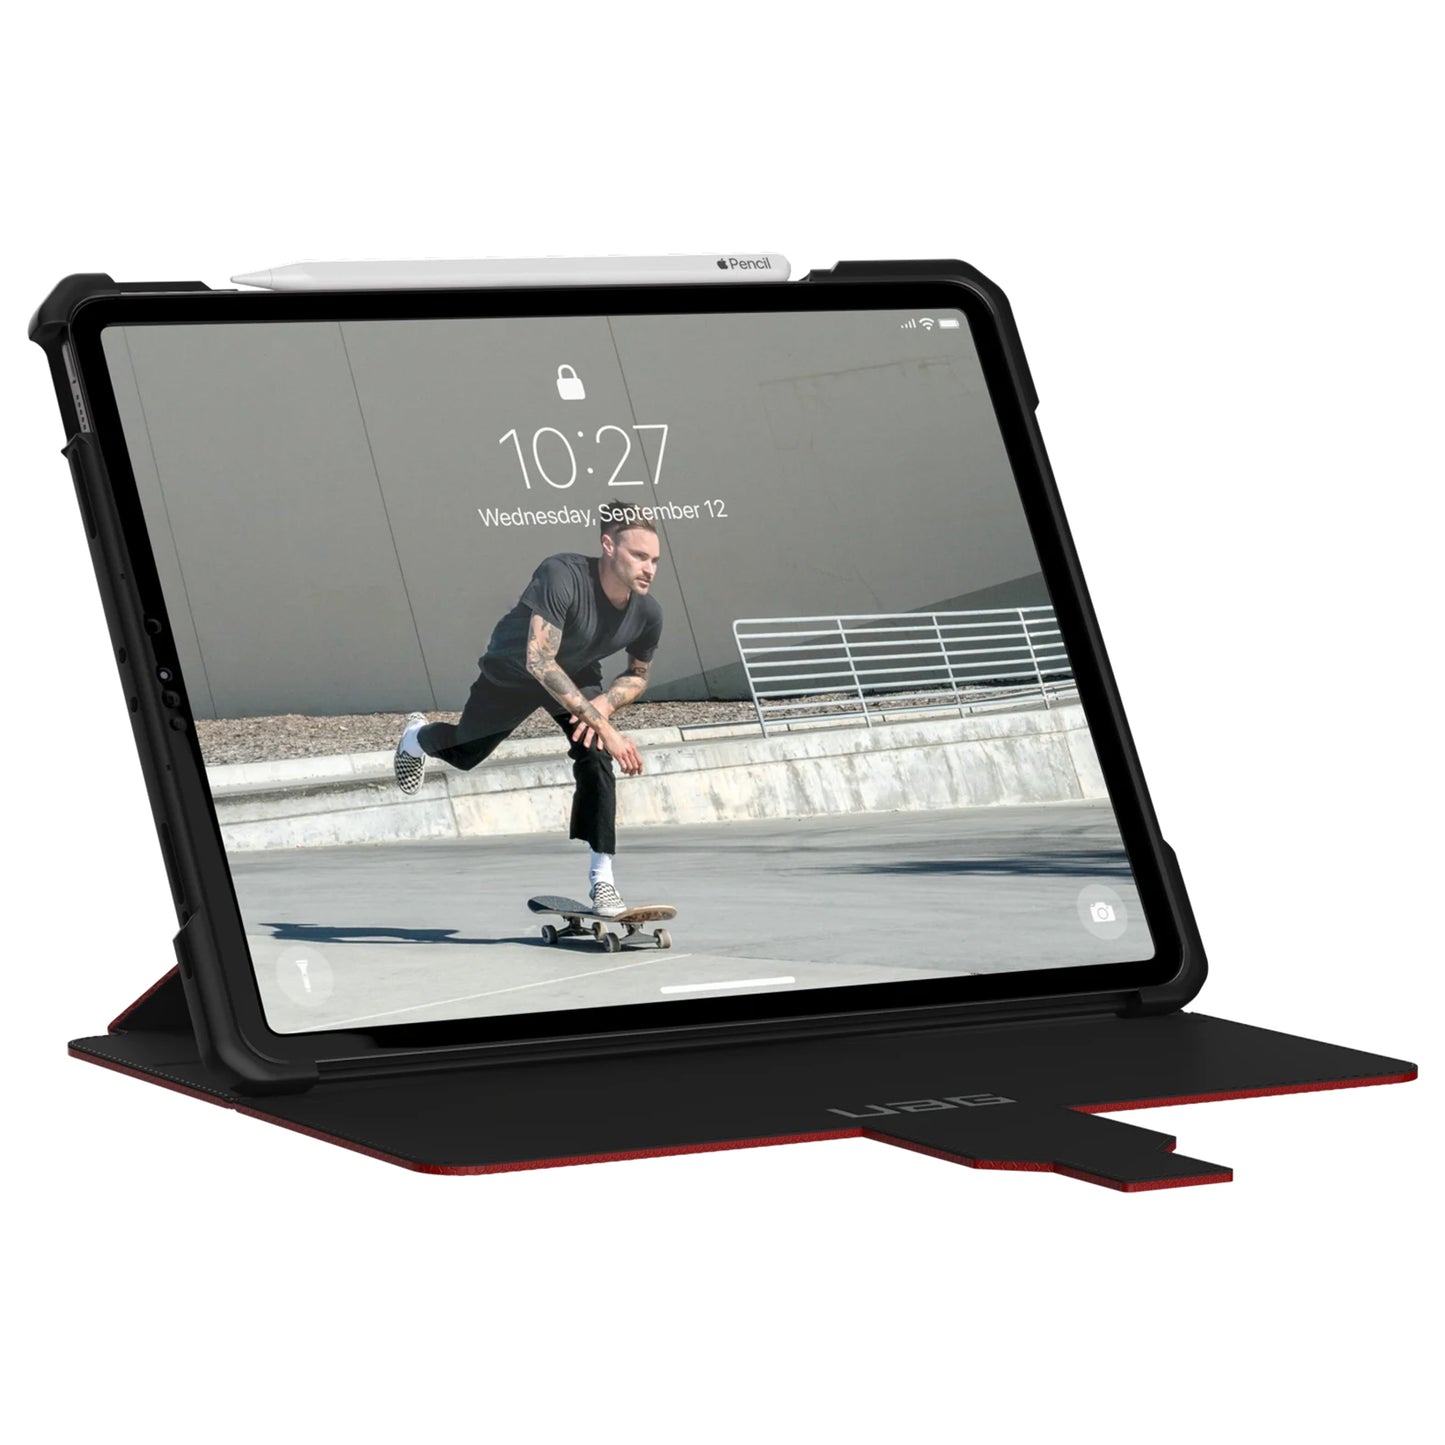 [RACKV2_CLEARANCE] UAG Metropolis for iPad Pro 12.9 ( 5th Gen - 2021 ) M1 Chip Case - Magma (Barcode : 810070360375 )